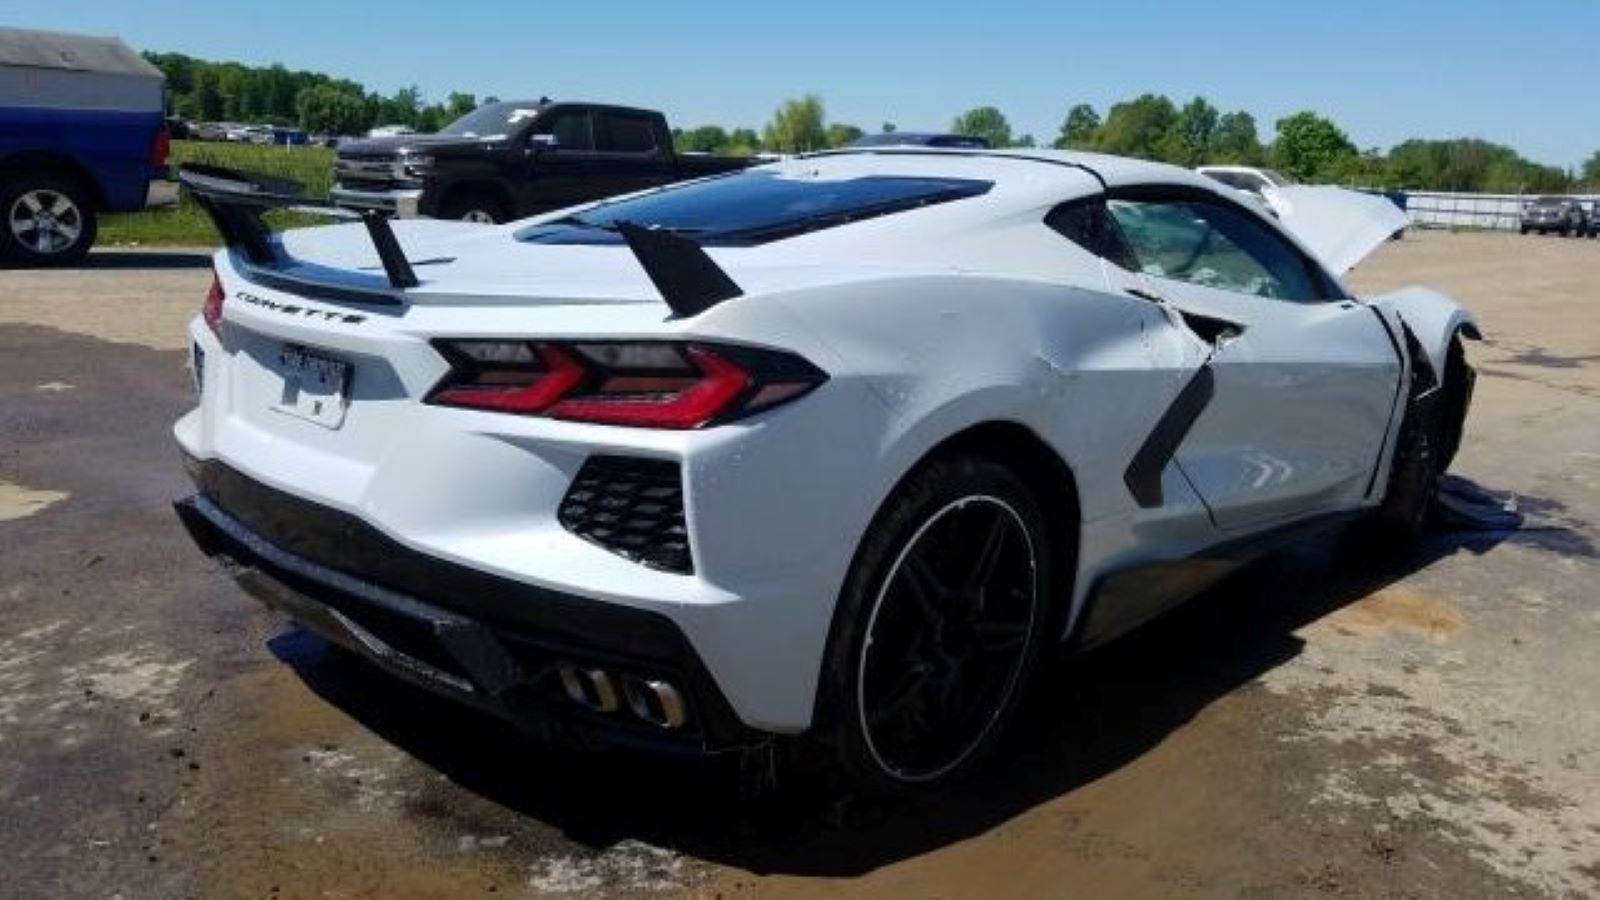 Another Wrecked C8 Corvette Pops up at Salvage Yard | Corvetteforum